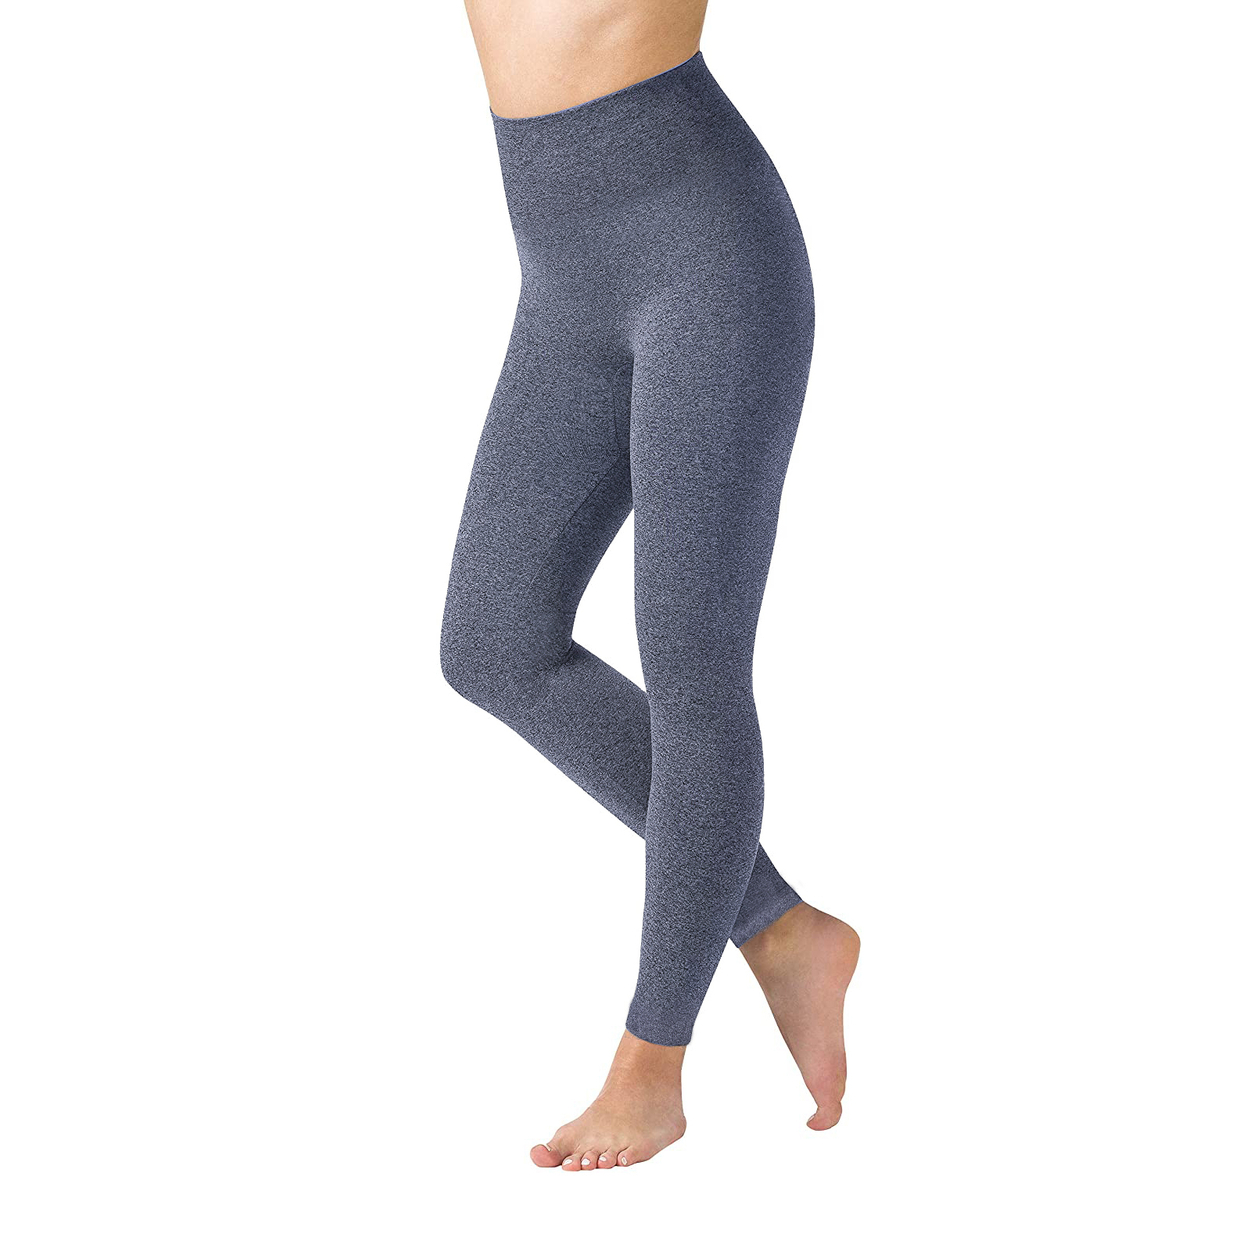 Multi-Pack: Women's High Waisted Ultra-Soft Fleece Lined Warm Marled Leggings(Available In Plus Sizes) - 1-pack, Charcoal, Small